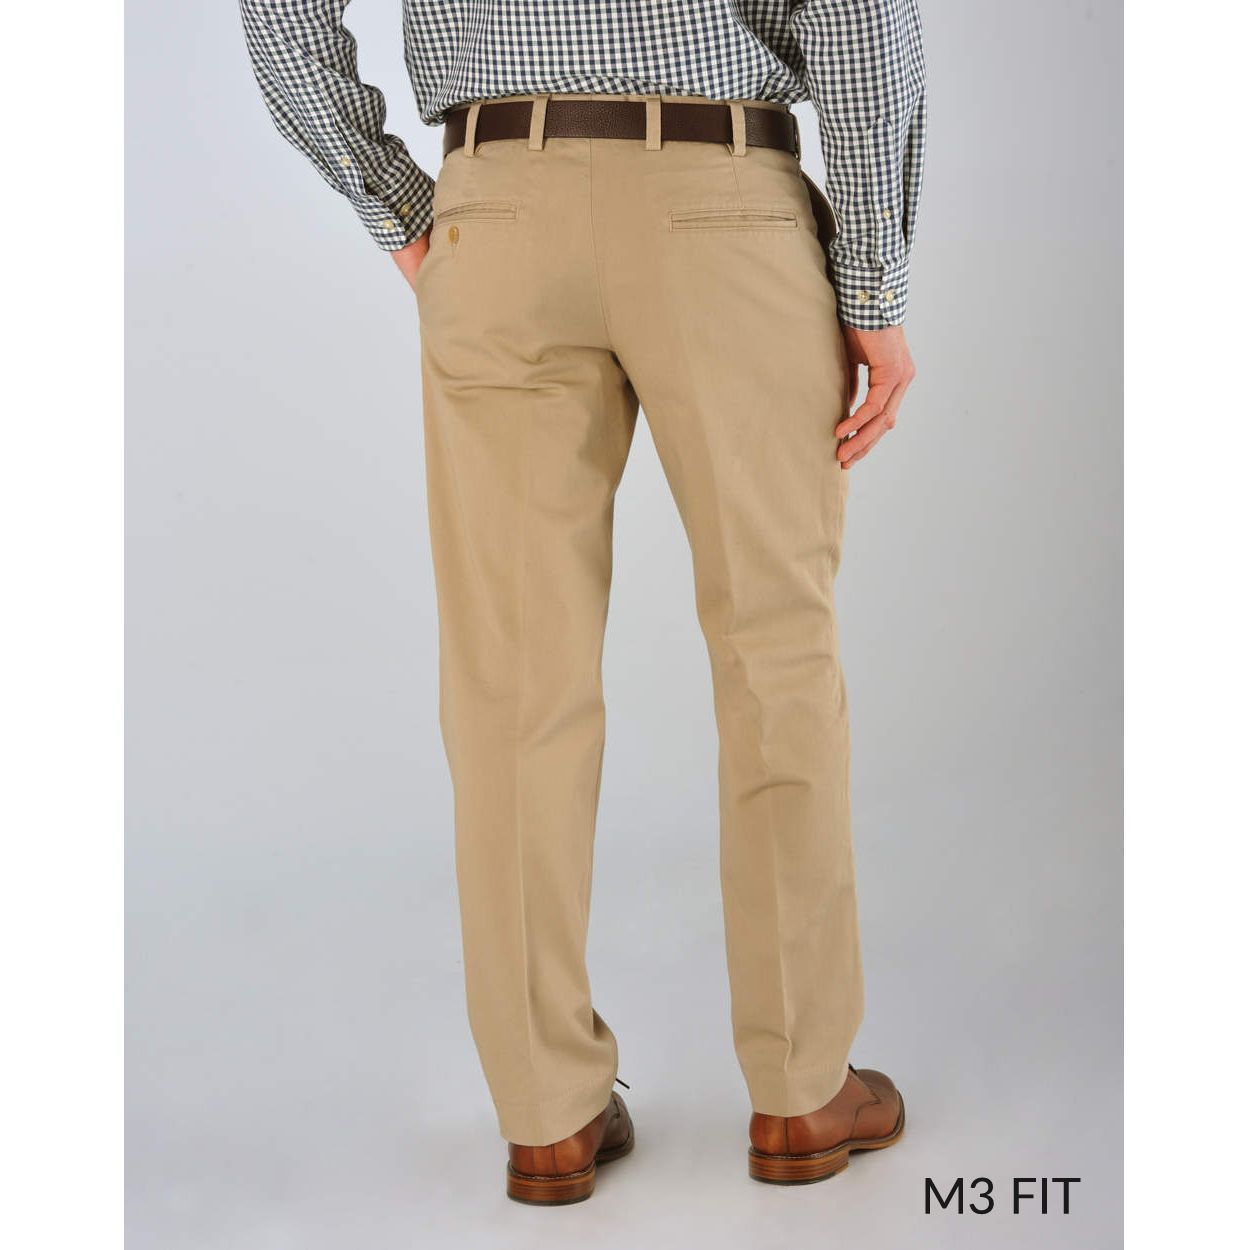 M3 Straight Fit T400 Comfort Stretch Twills in Oyster (Size 40 x 32) by Bills Khakis